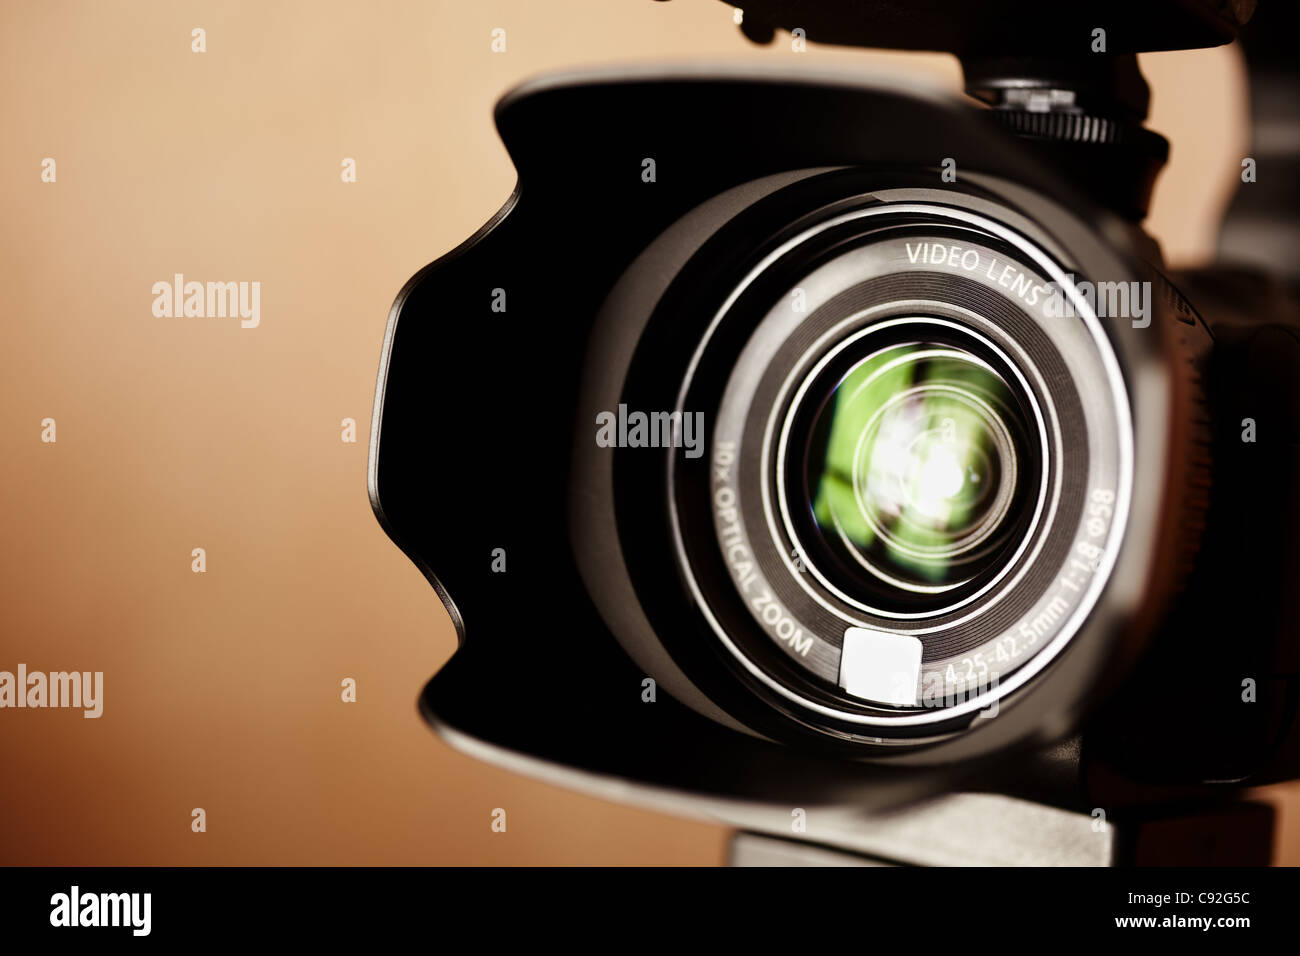 professional high definition camcorder in close up, selective focus Stock Photo